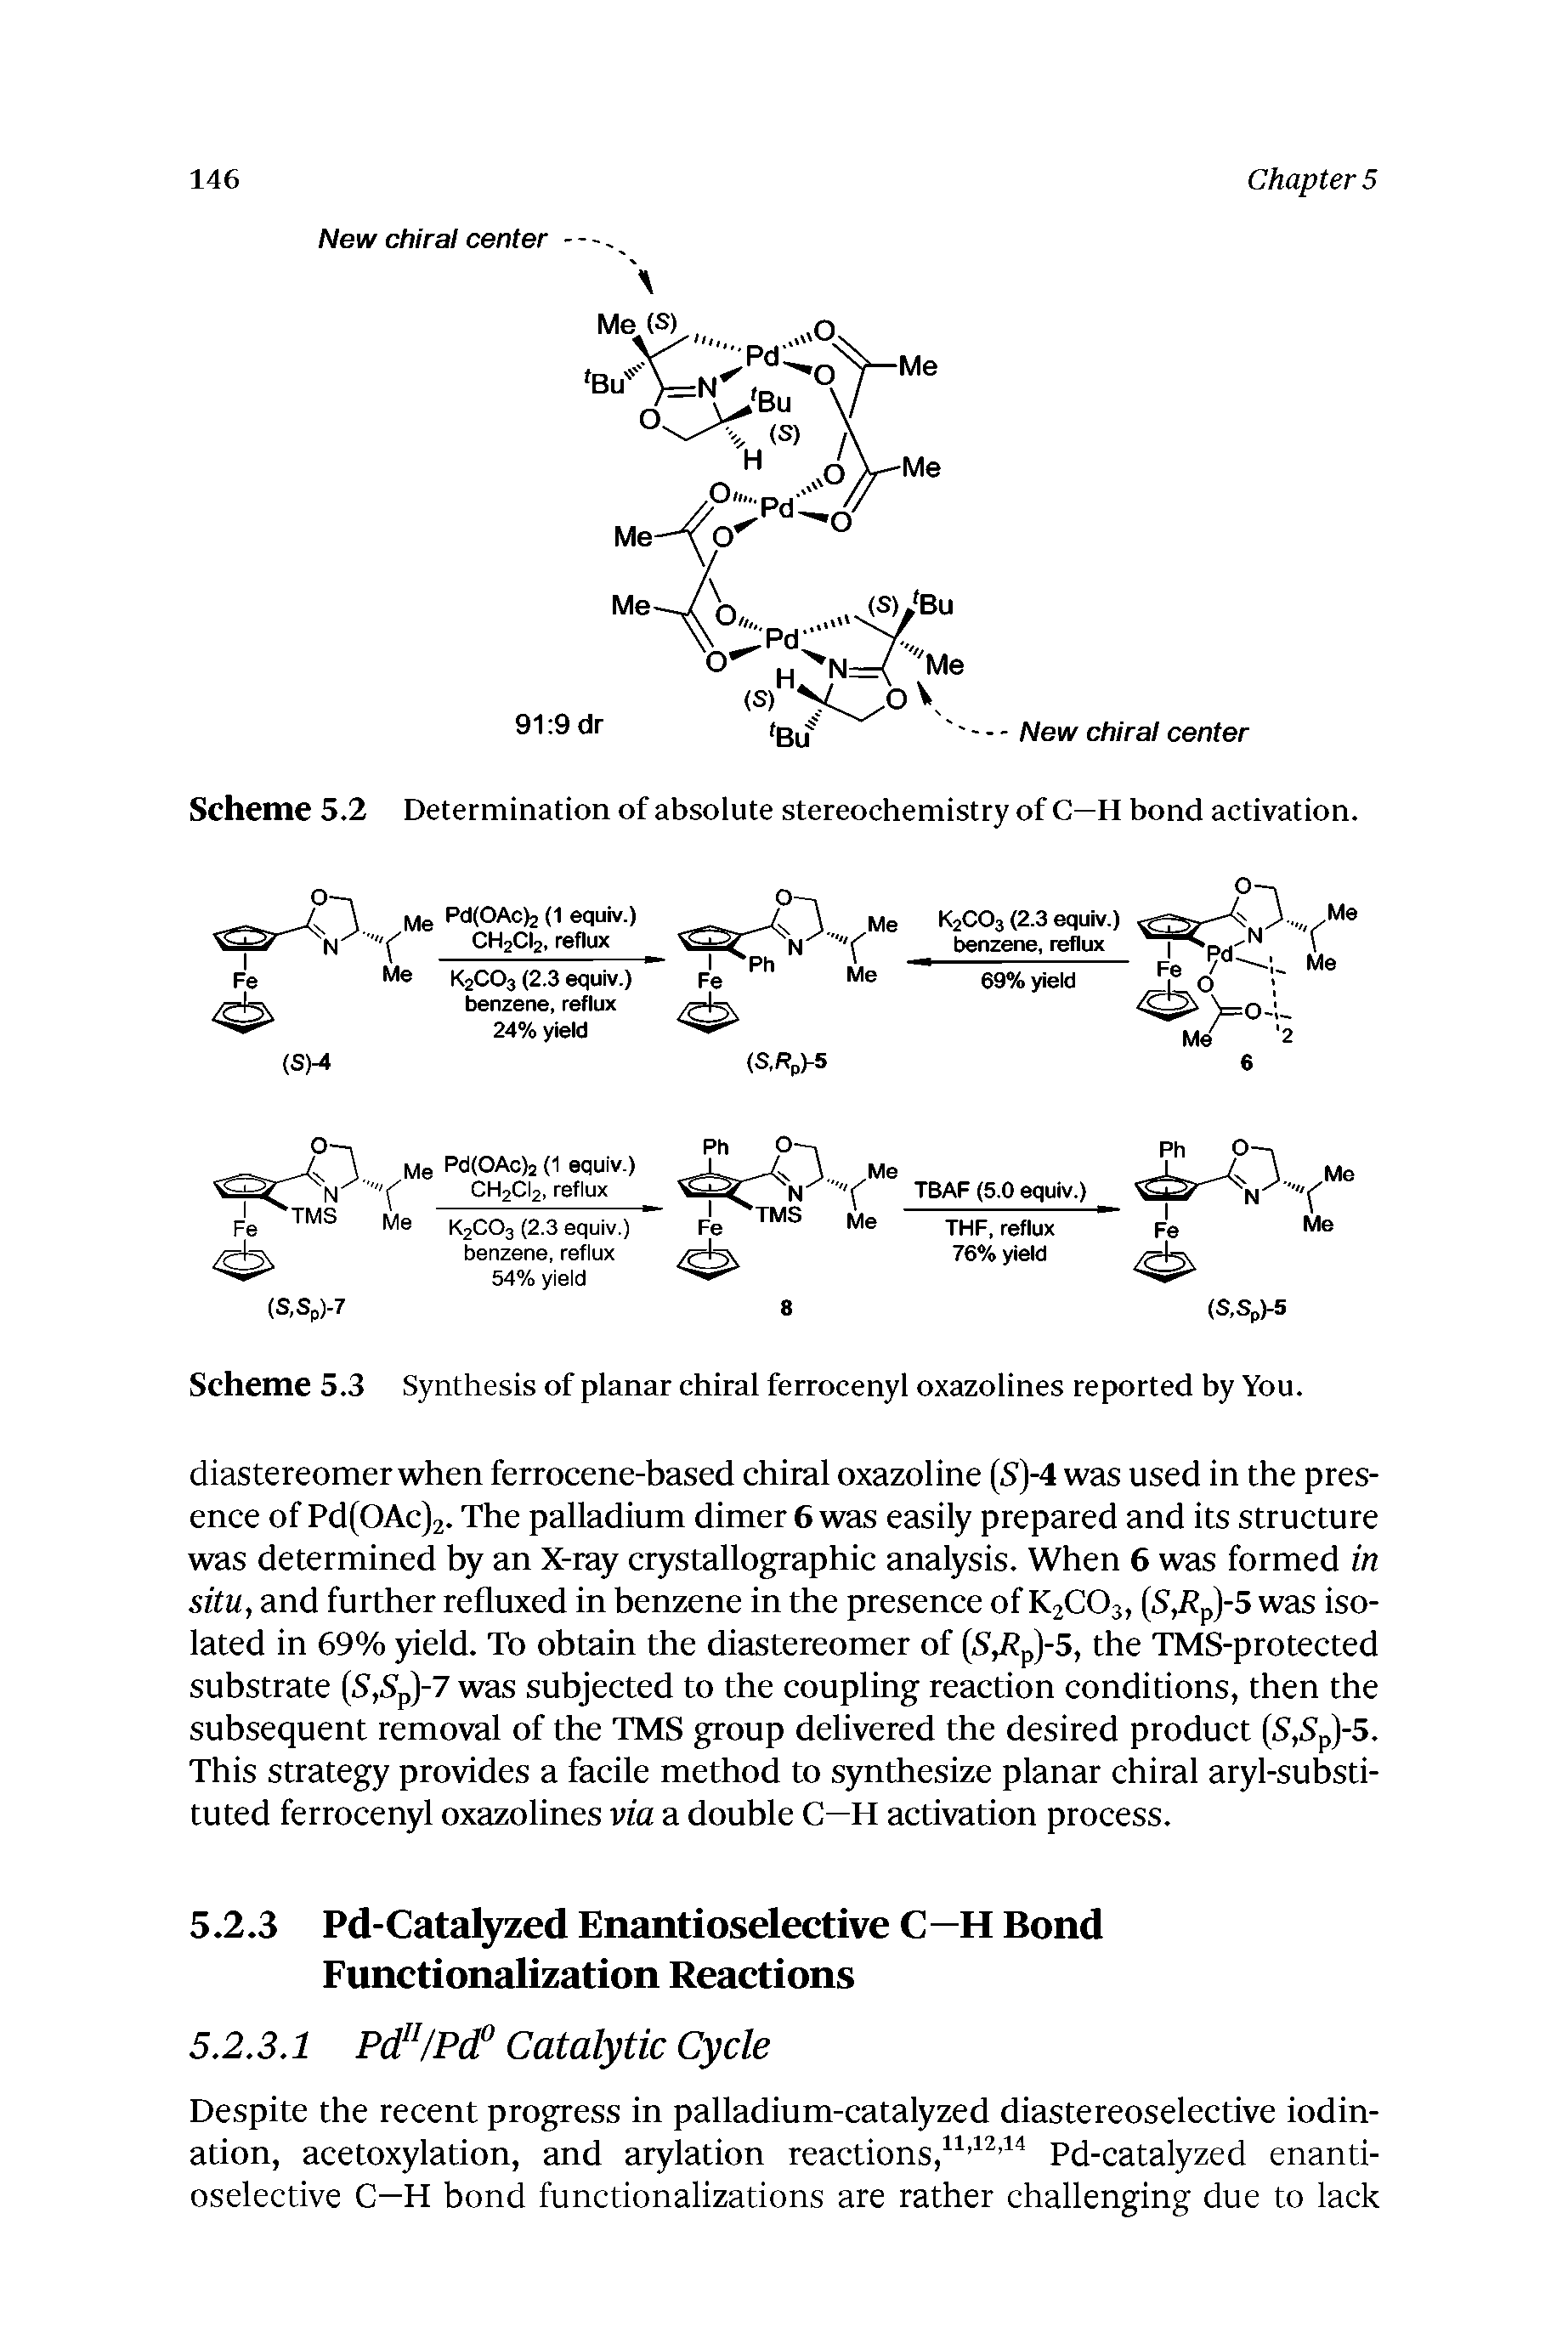 Scheme 5.3 Synthesis of planar chiral ferrocenyl oxazolines reported by You.